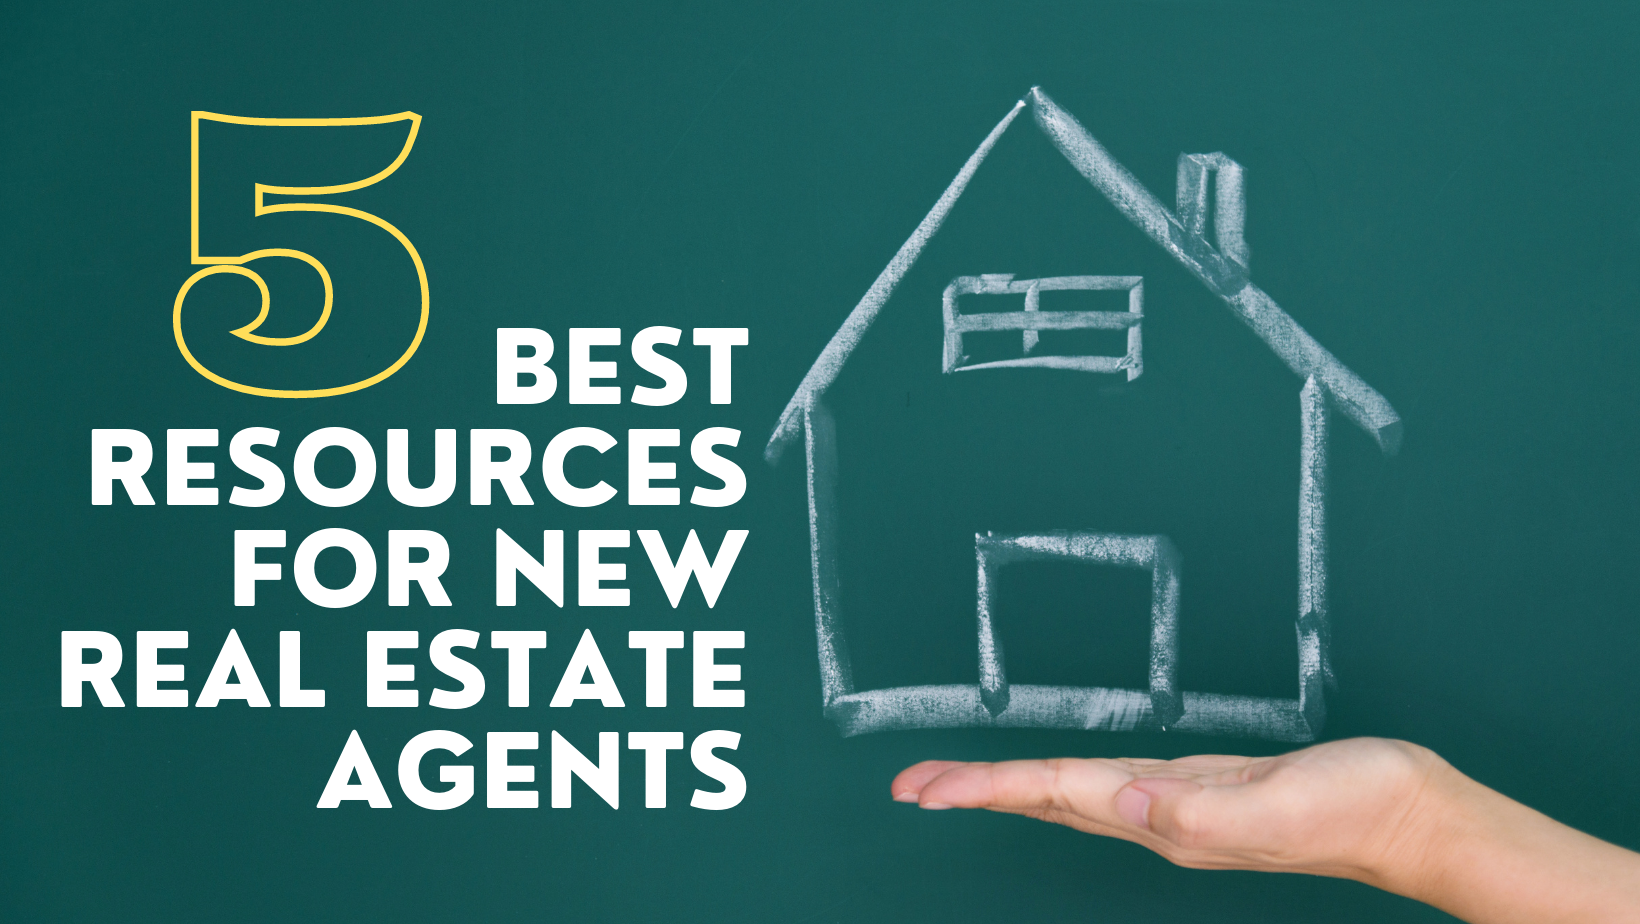 5 Best Resources for New Real Estate Agents